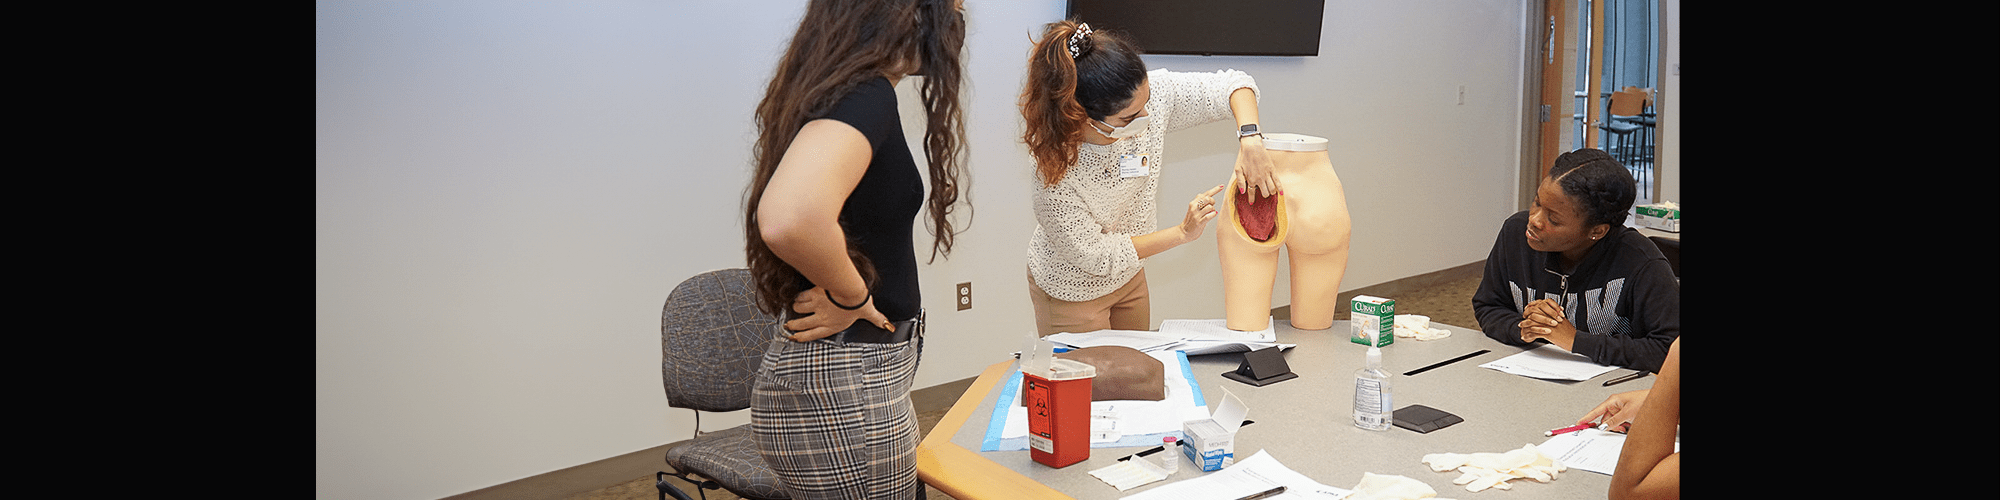 Student pharmacists receive instruction on how to administer long-acting injectables.